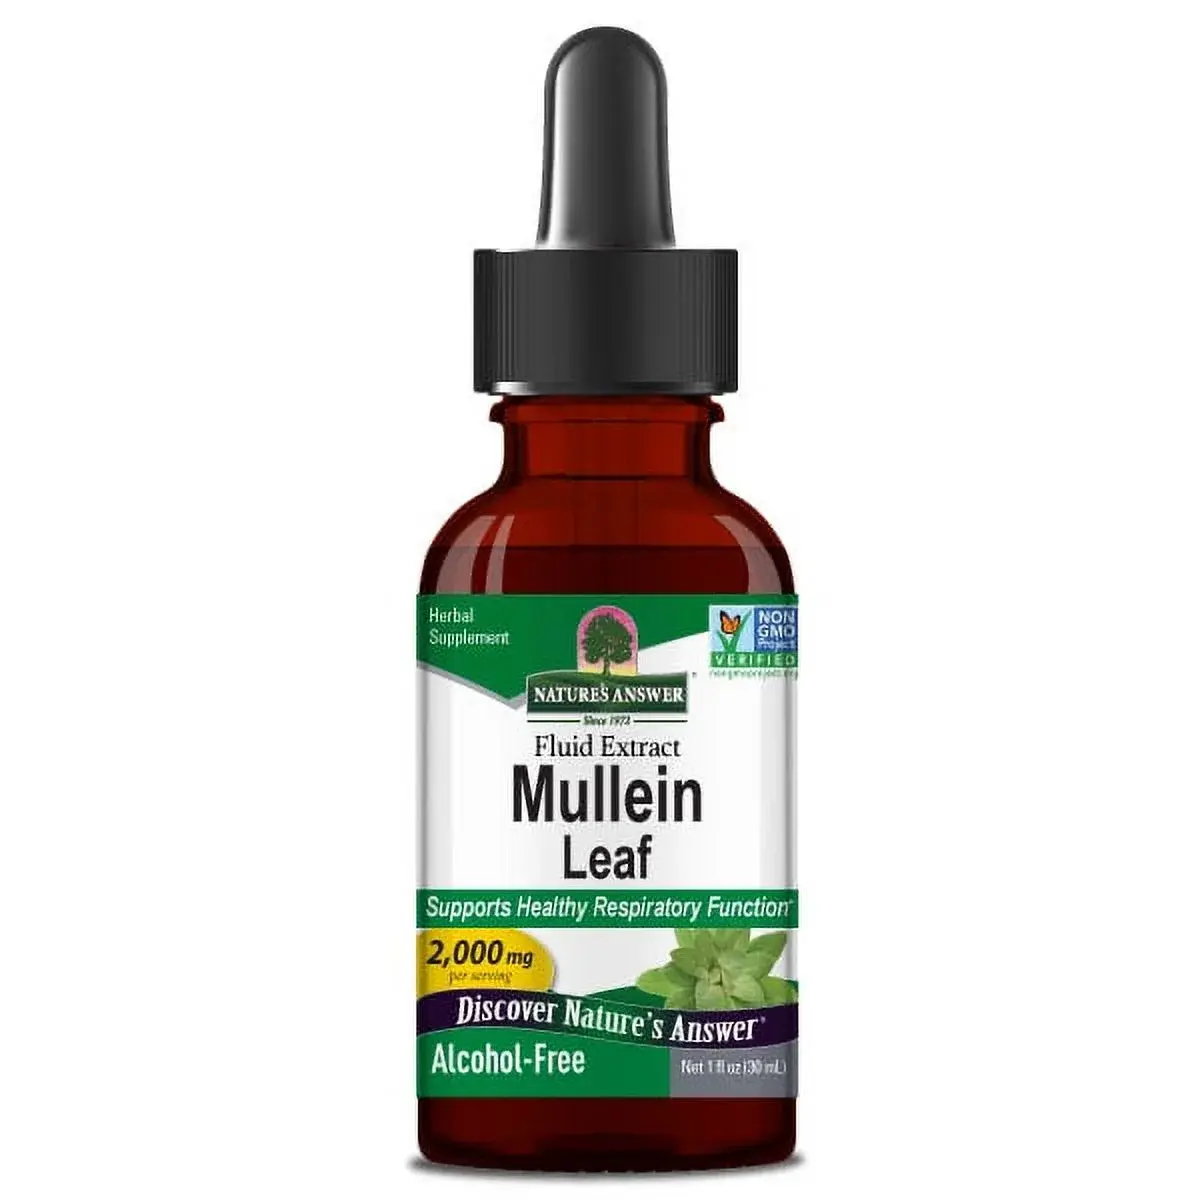 Nature's Answer Mullein Leaf Liquid Extract